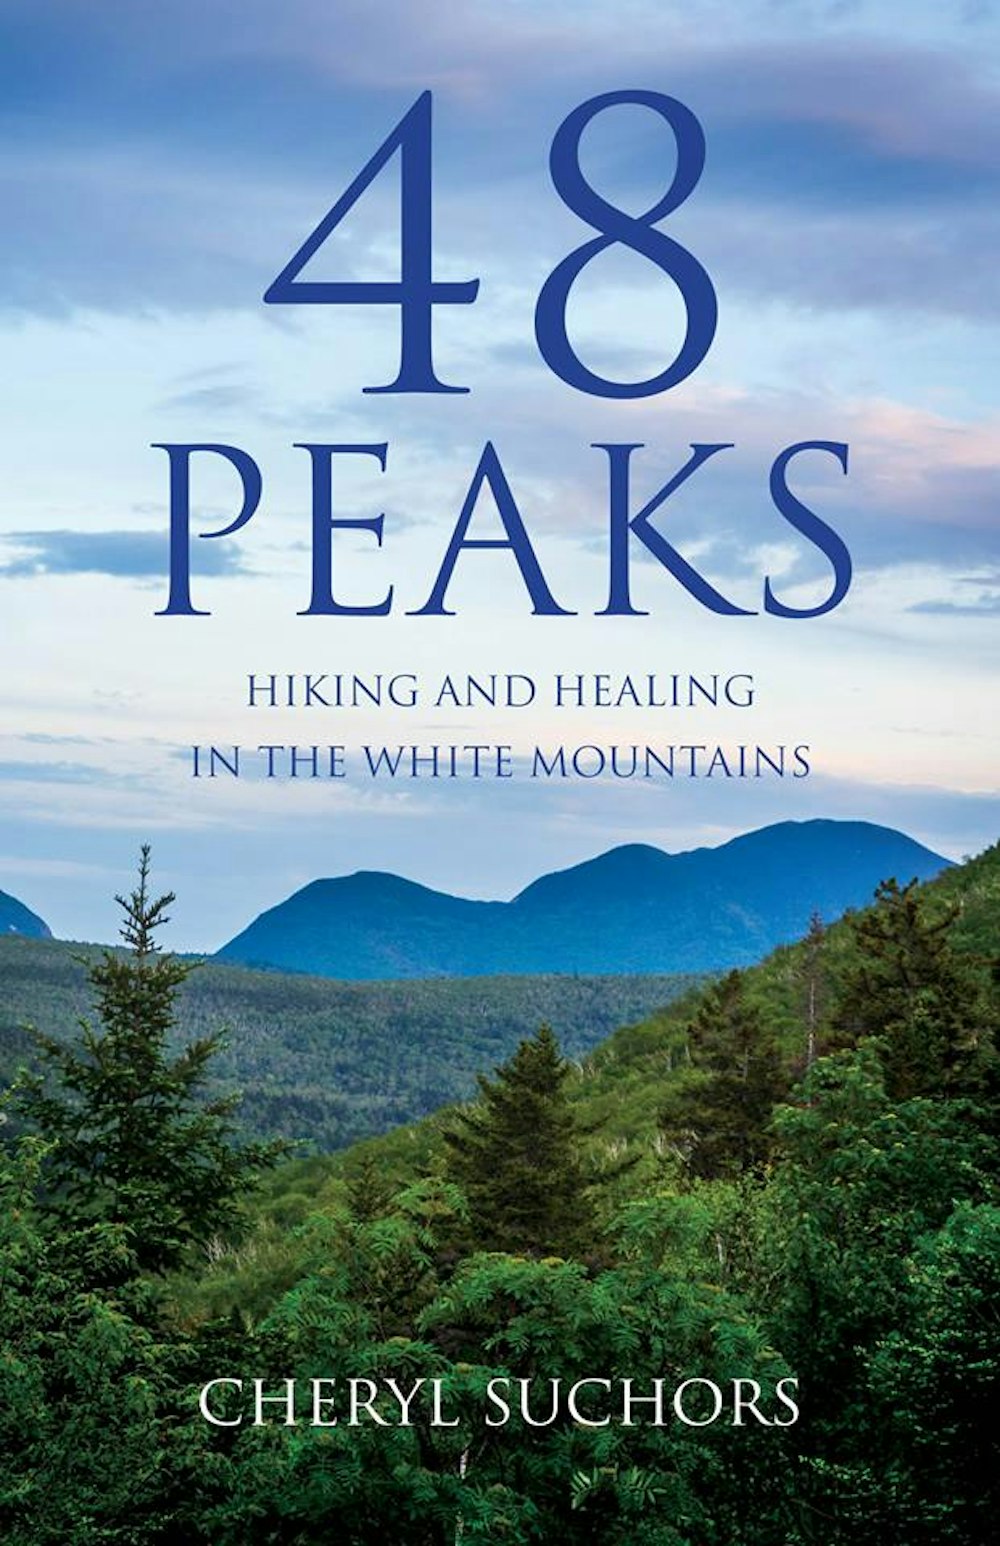 Episode #23 Lagniappe - Cheryl Suchors (48 Peaks - Hiking and Healing in the Mountains)